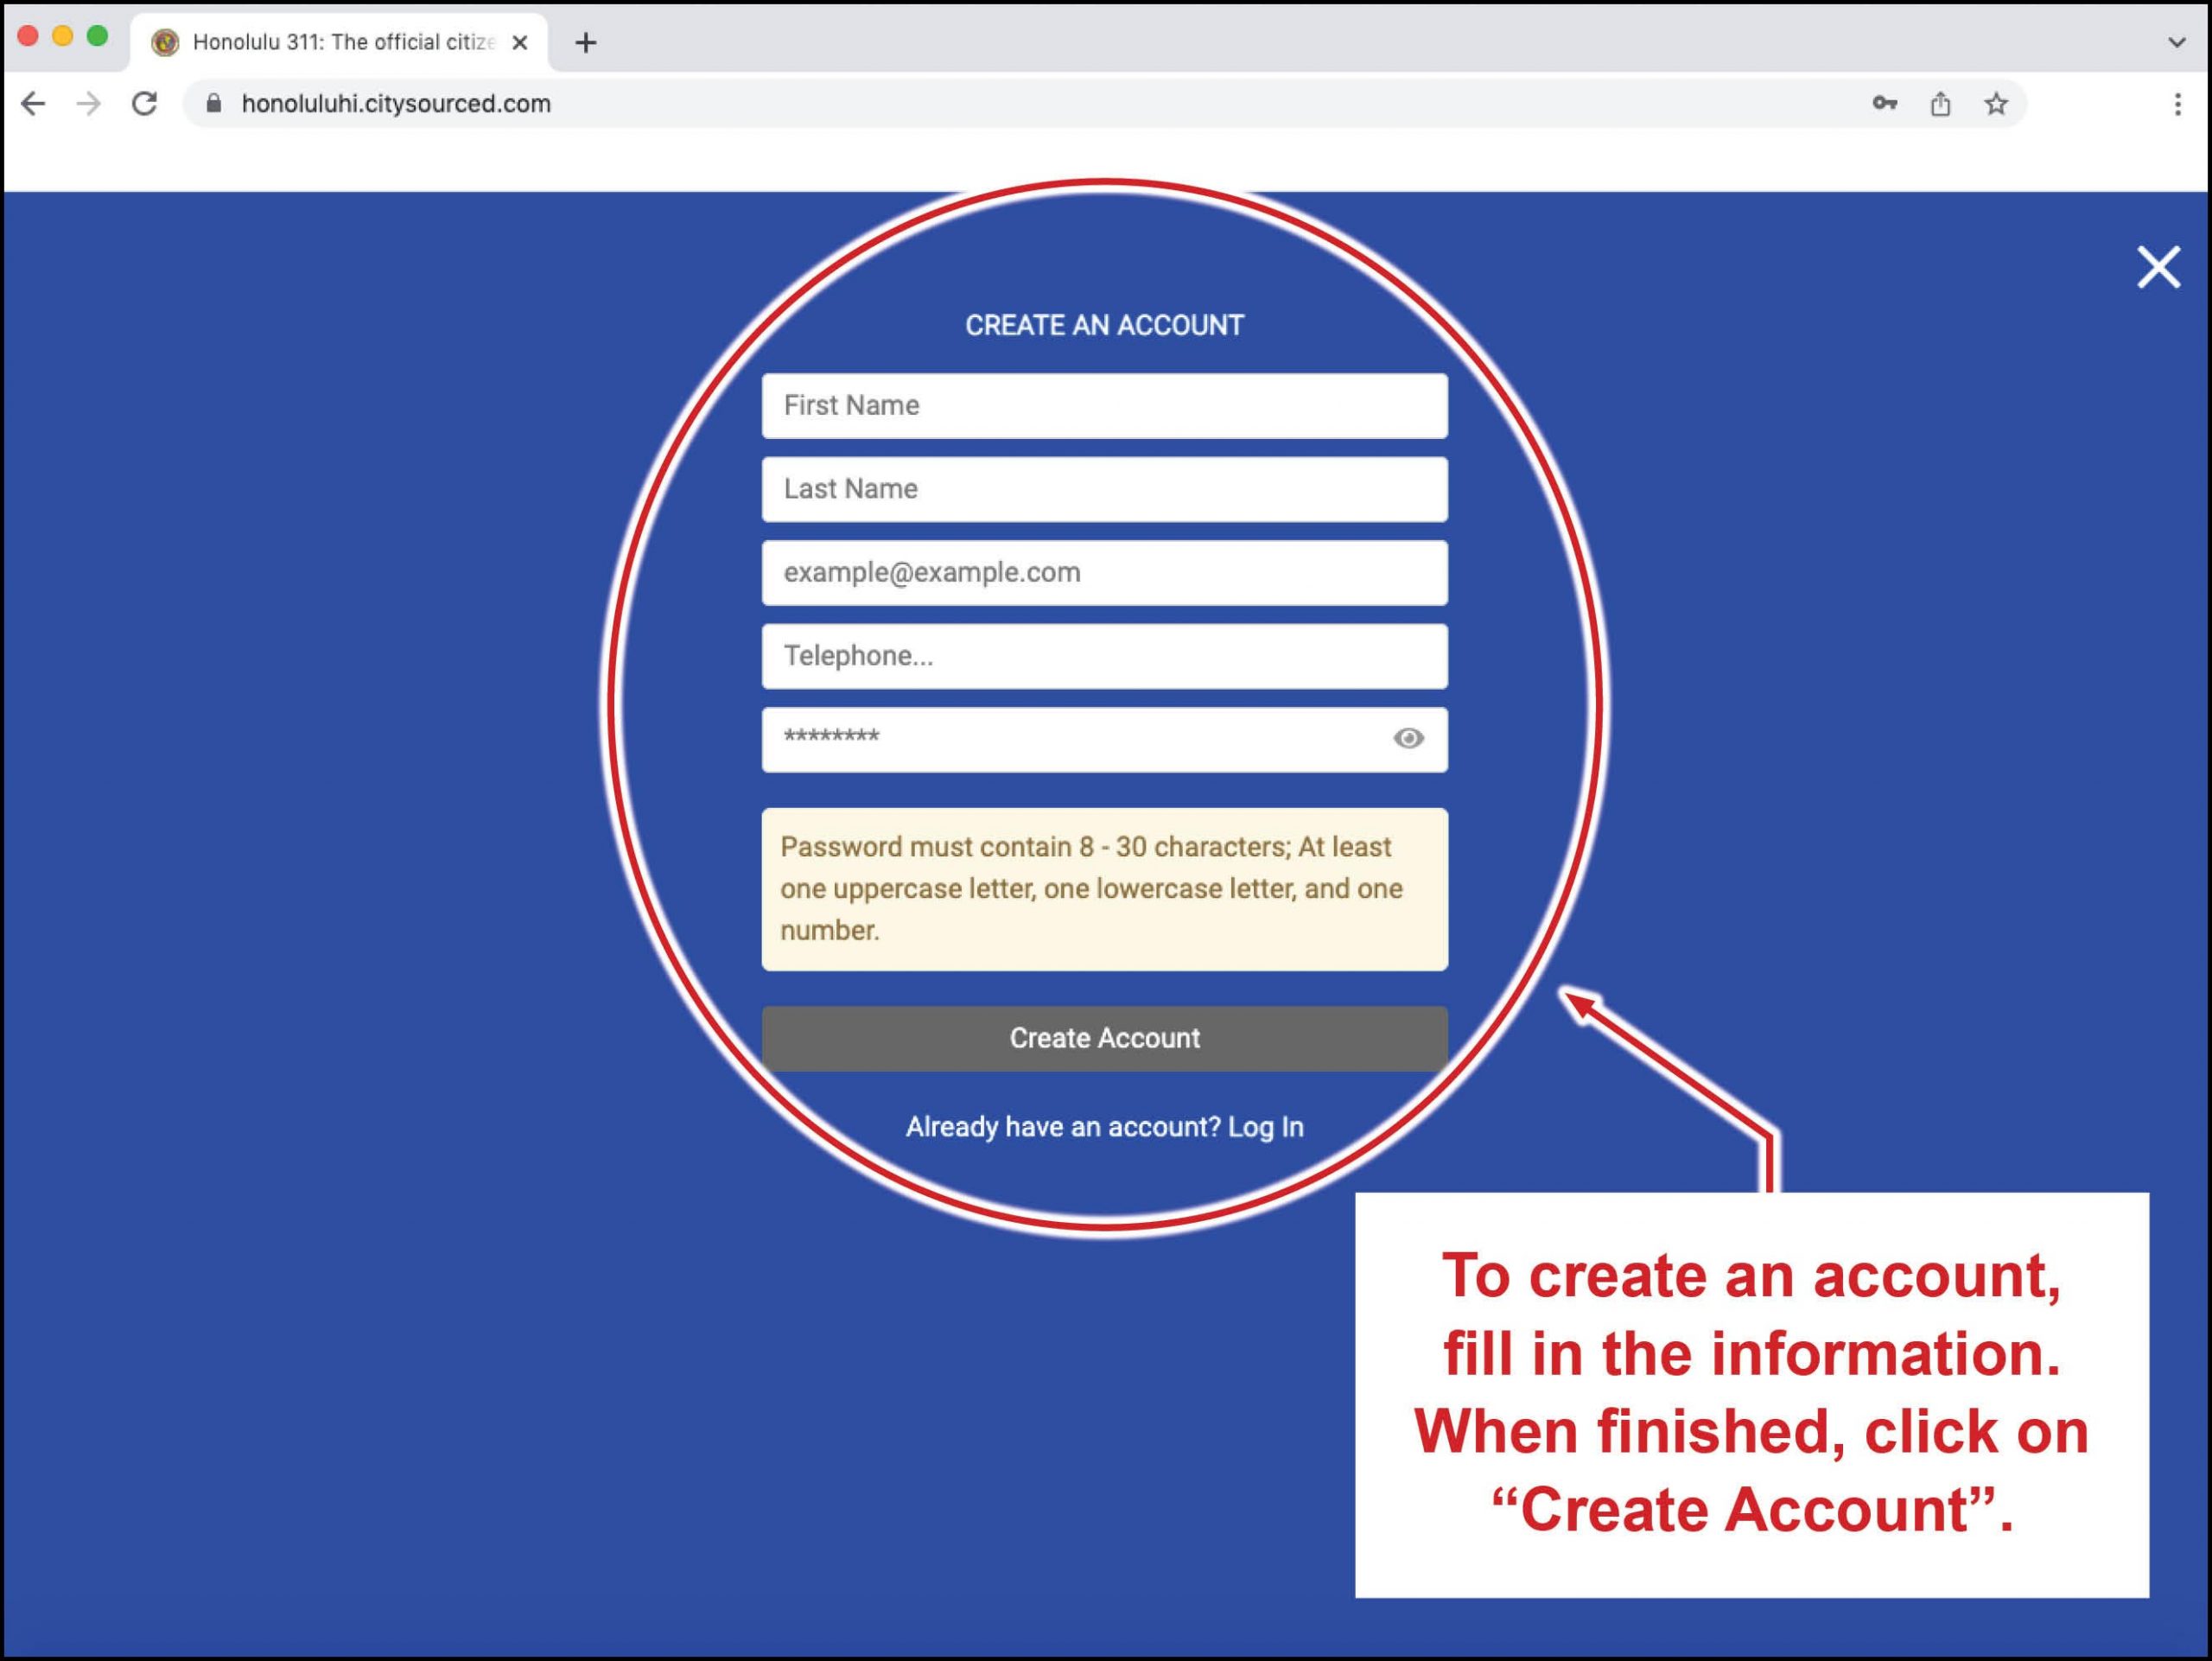 To create an account, fill in the information requested on the "CREATE AN ACCOUNT" page. When finished, click on "Create Account".